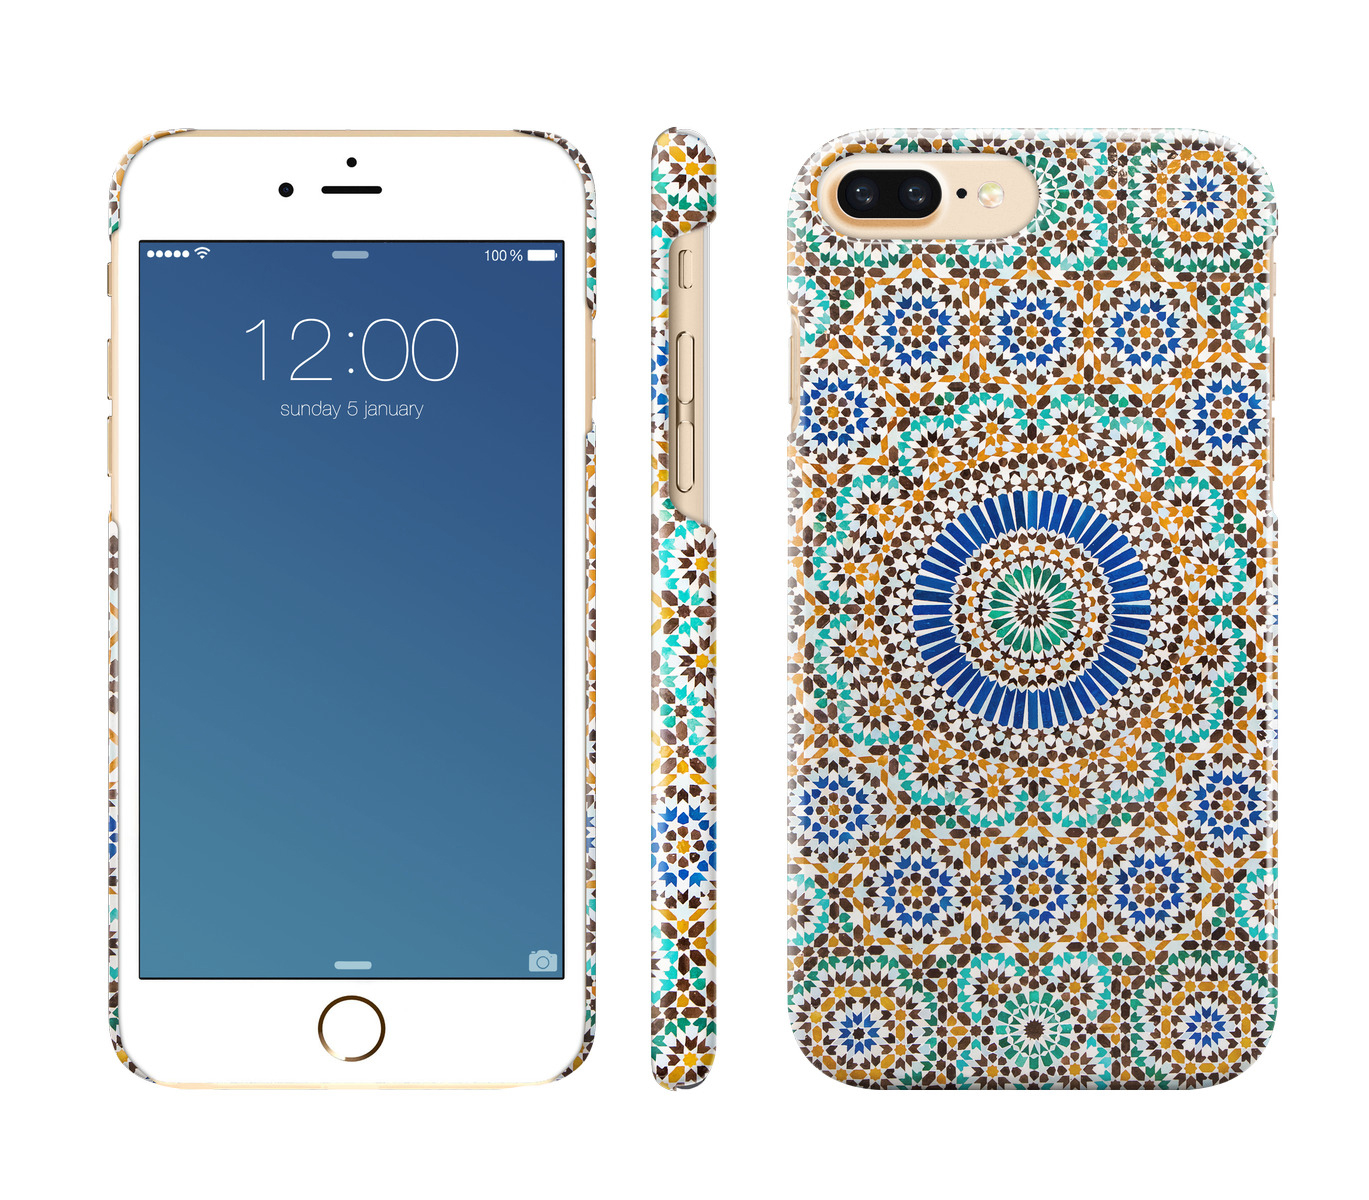 Plus iPhone OF IDEAL iPhone 8 Backcover, Zellige 6 Fashion, ,iPhone Plus, Plus, 7 Apple, SWEDEN Moroccan